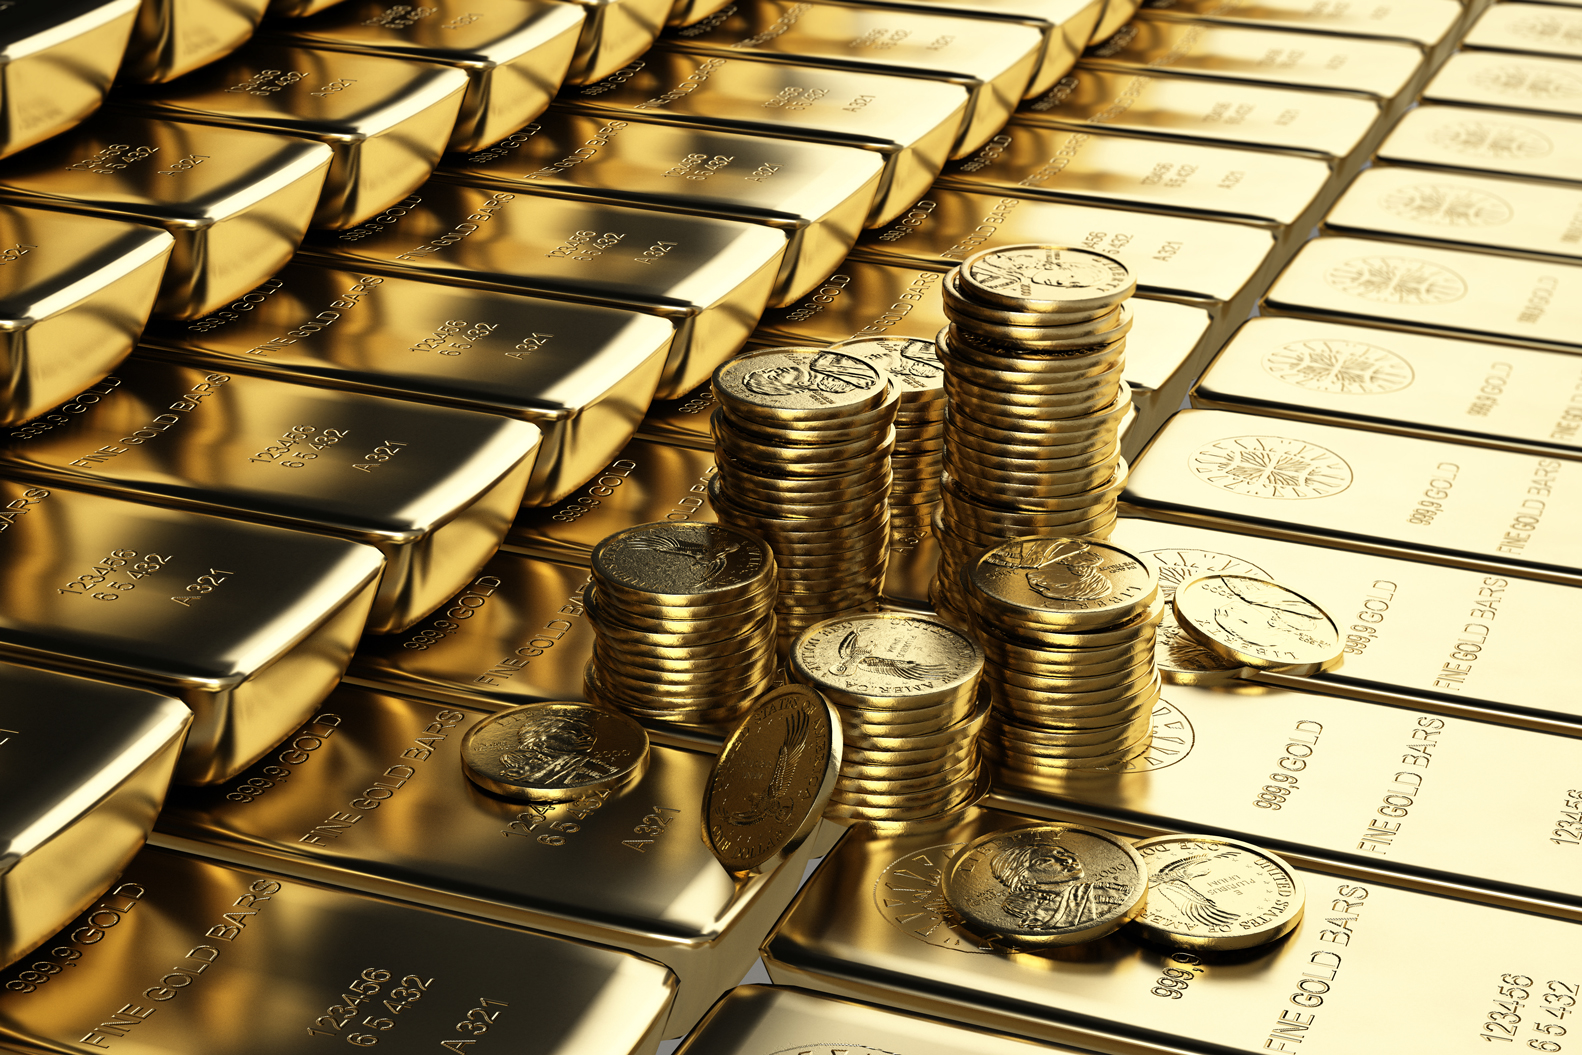 Has Gold Been a Good Investment Over the Long Term?